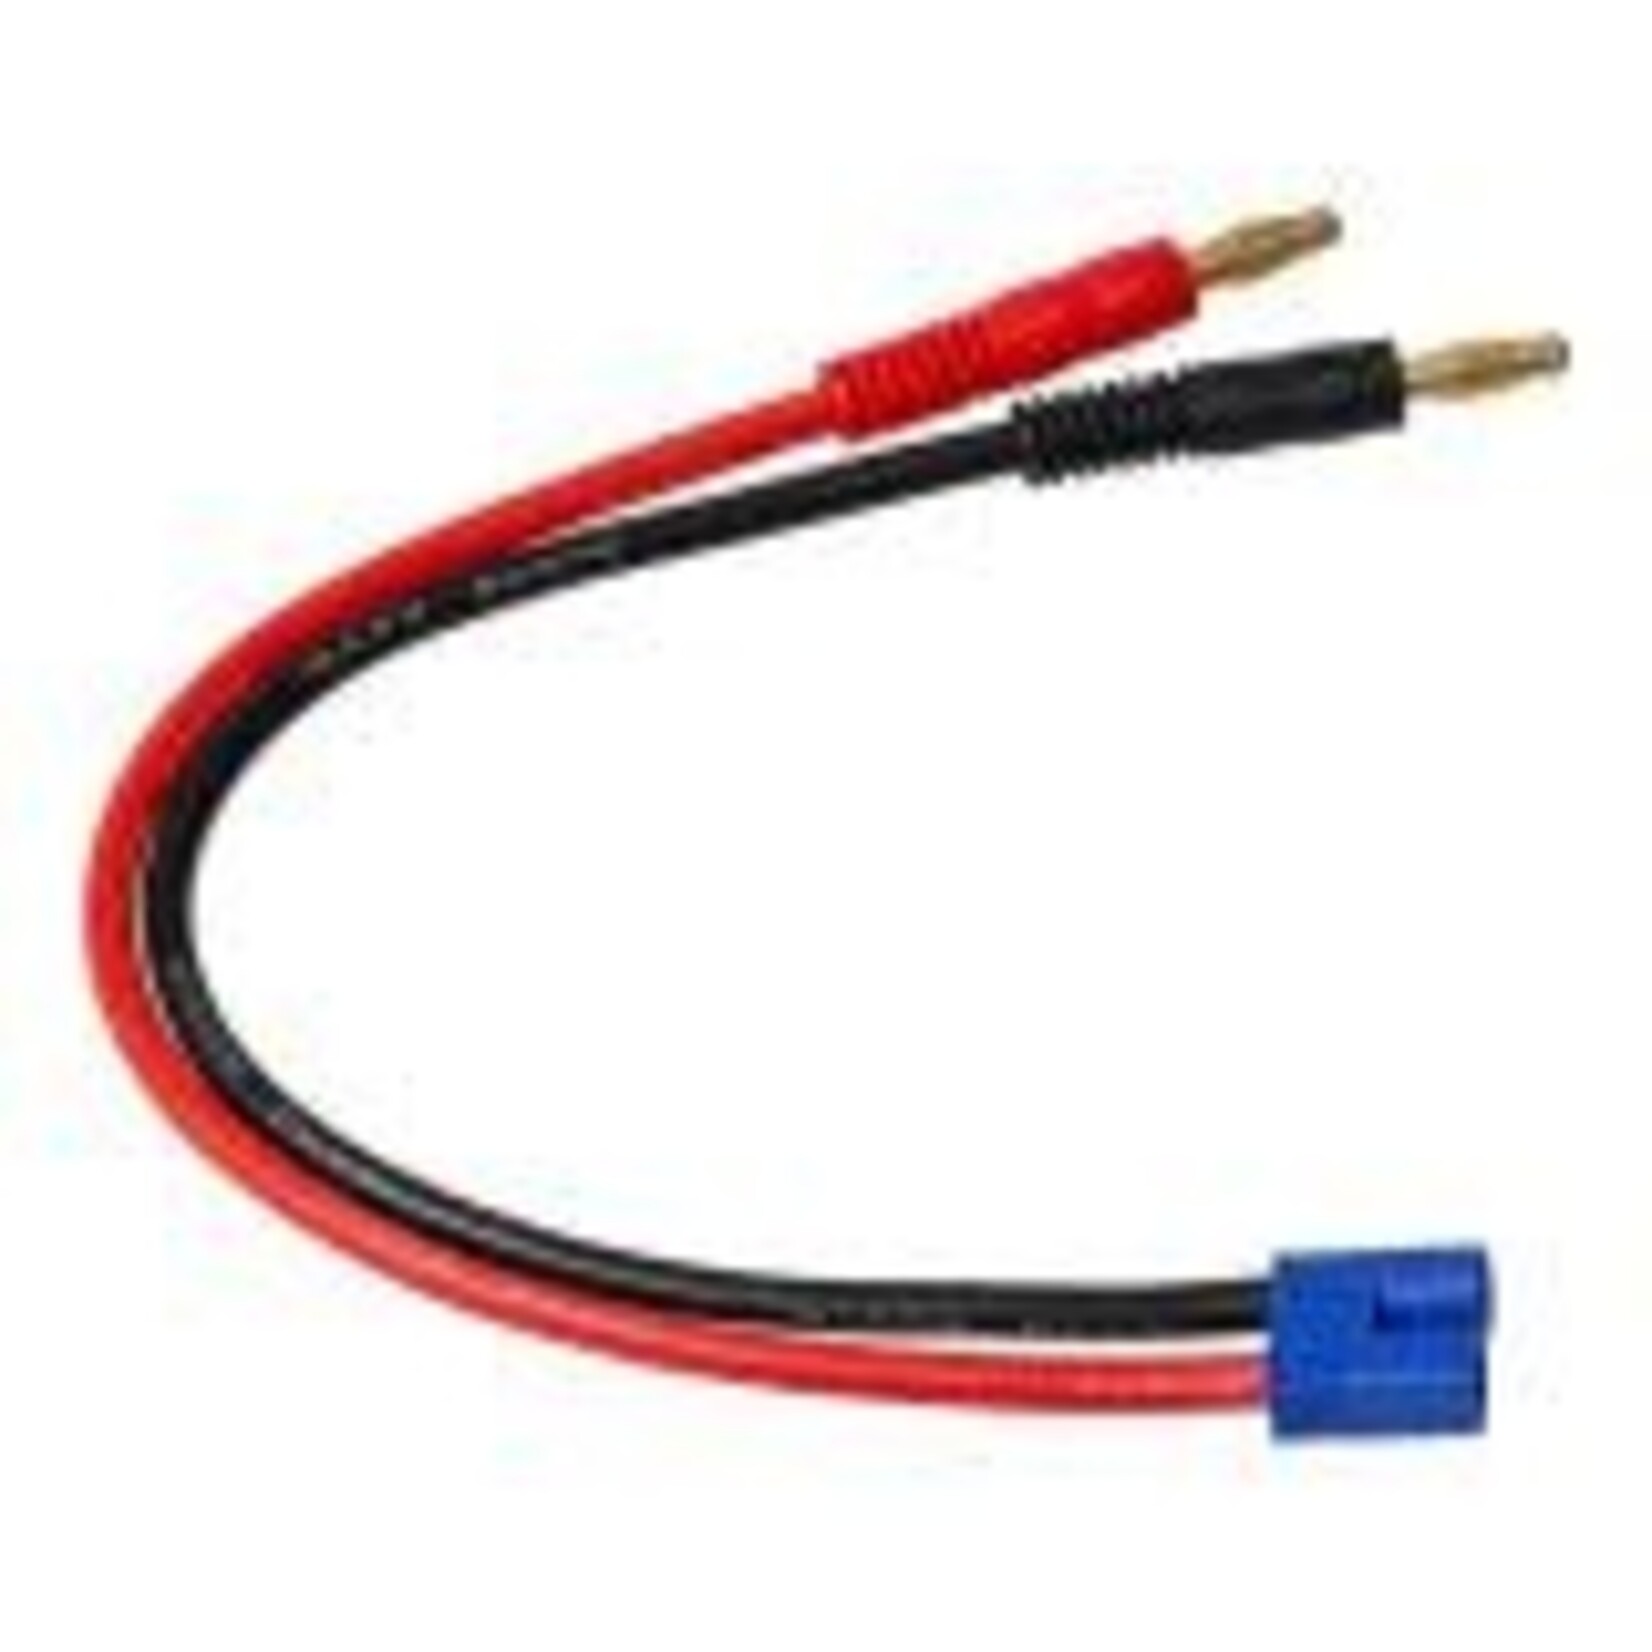 Powerhobby EC3 Charge Lead   Powerhobby EC3 Charge Lead 12AWG Wire